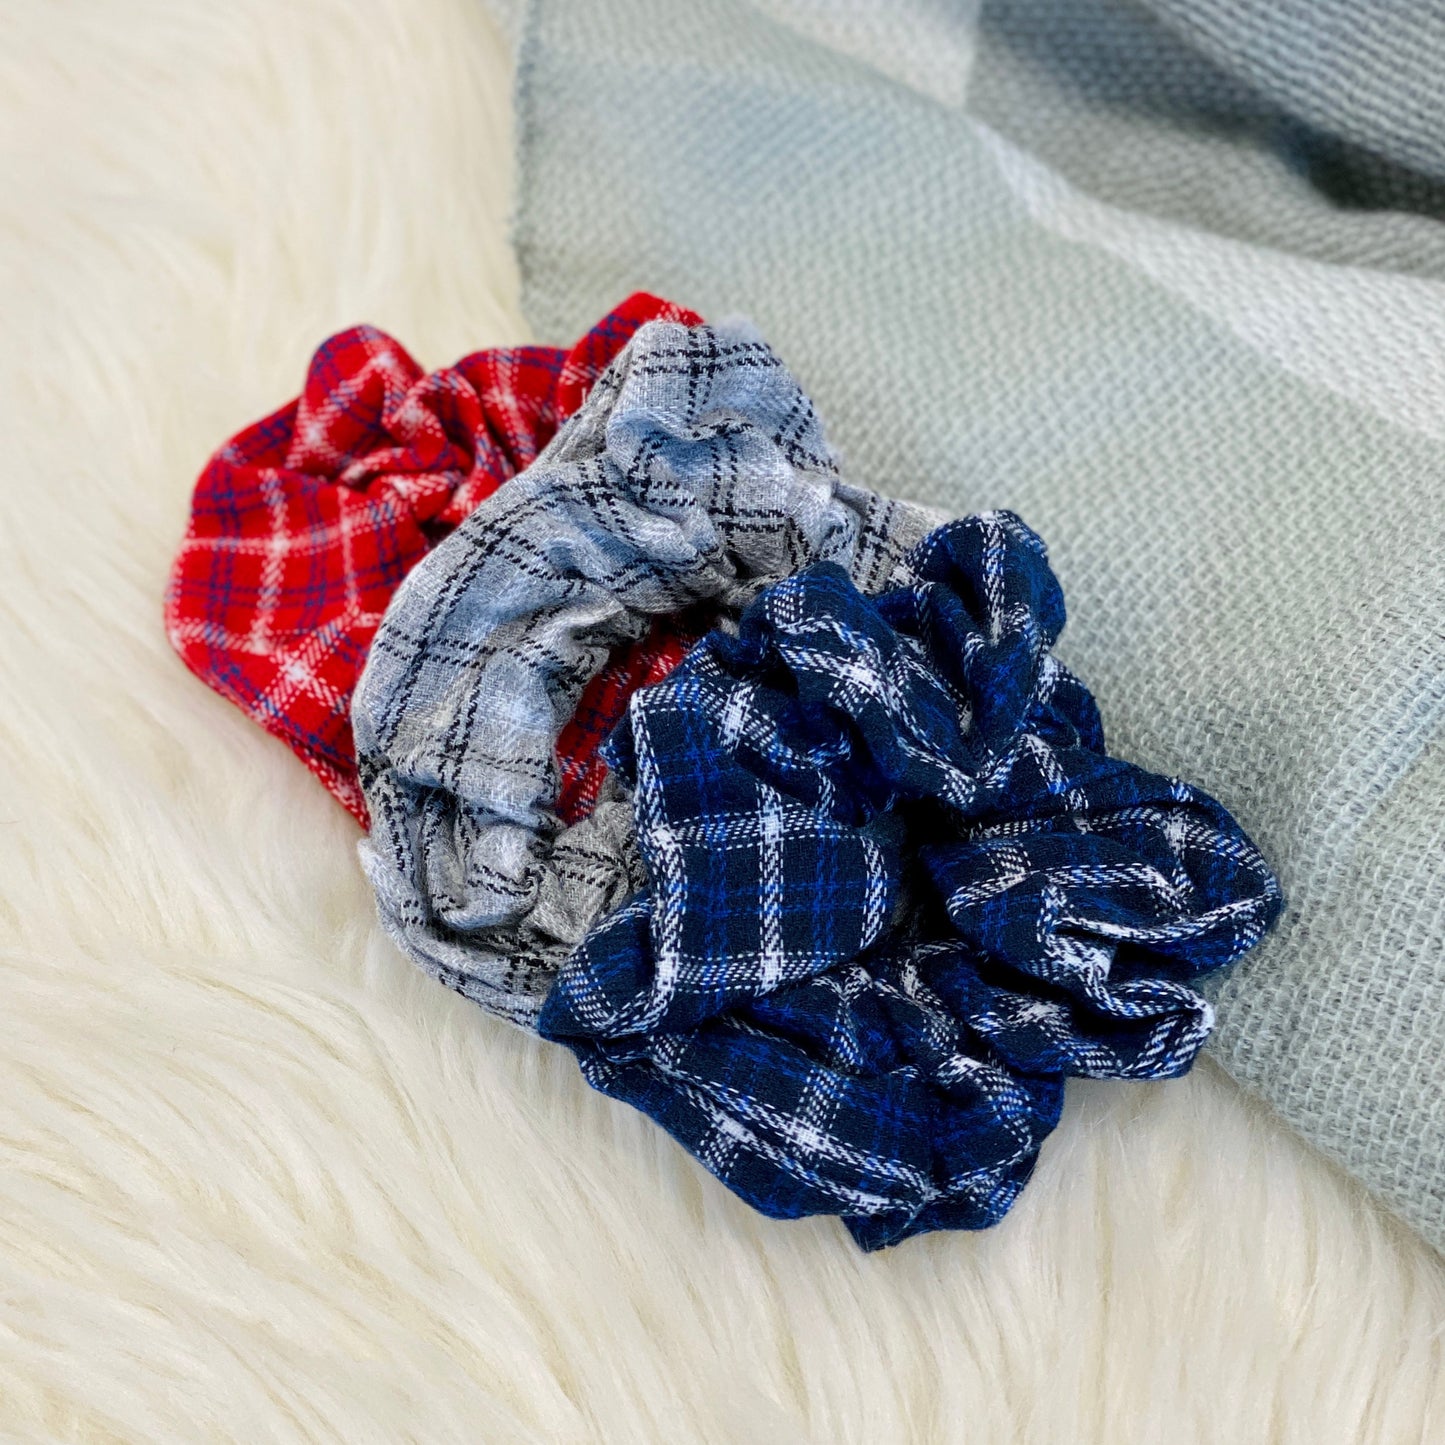 Our Varsity Flannel Scrunchie Set has three scrunchies that are different color flannel prints. Perfect to match with your favorite outfit for fall! Also available in our Fall Flannel Scrunchie Set which has softer flannel print tones.